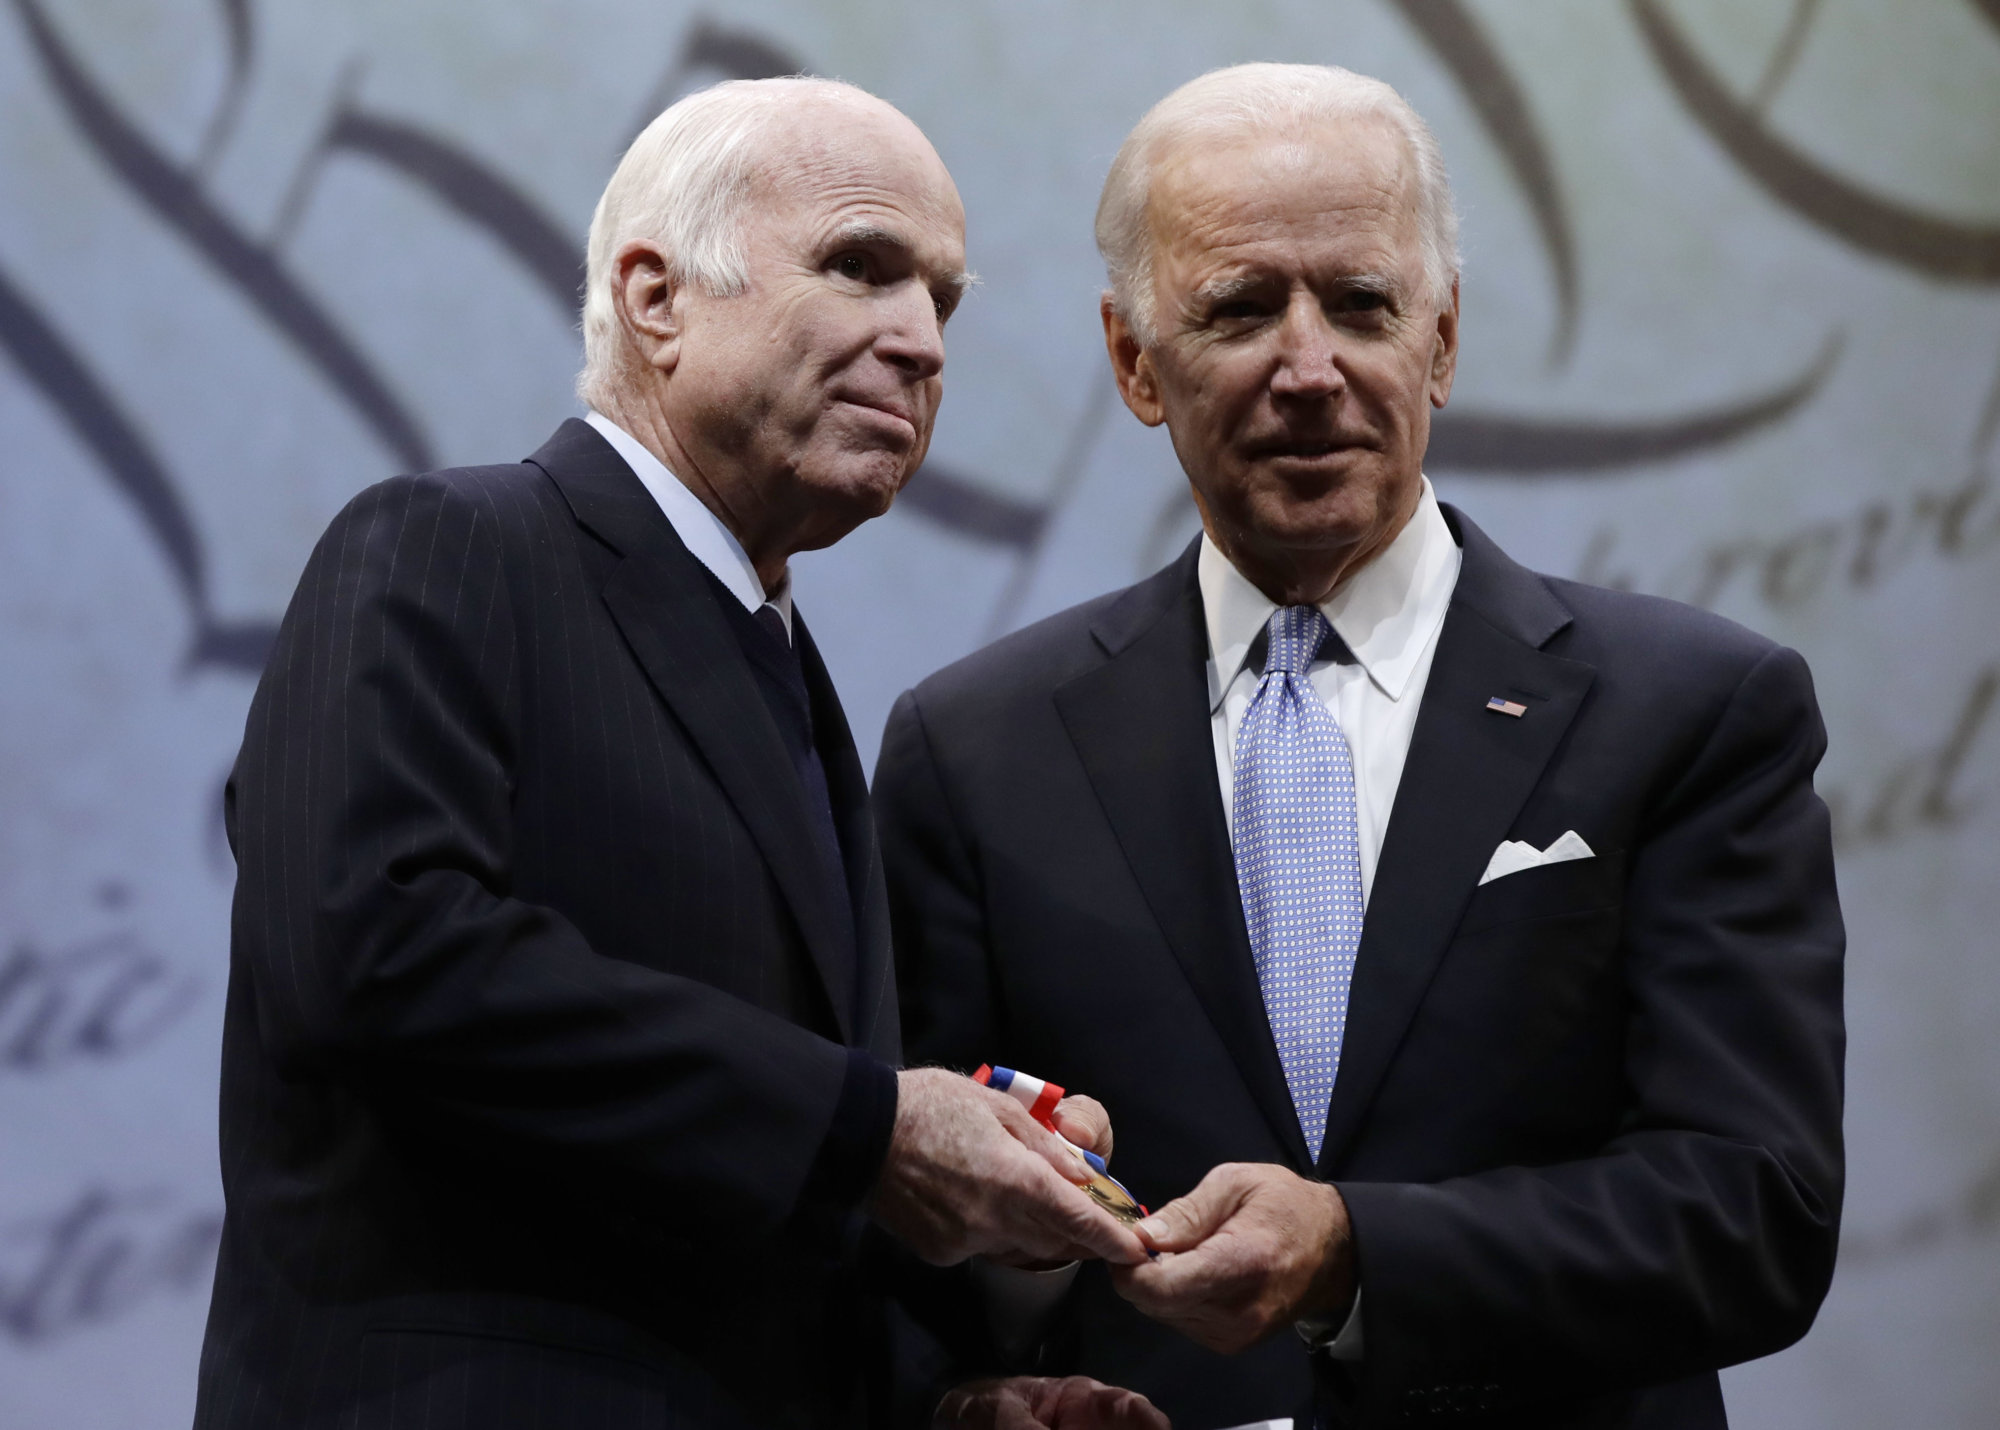 Sen. John McCain, R-Ariz., receives the Liberty Medal from Chair of the National Constitution Center's Board of Trustees, former Vice President Joe Biden in Philadelphia, Monday, Oct. 16, 2017. The honor is given annually to an individual who displays courage and conviction while striving to secure liberty for people worldwide. (AP Photo/Matt Rourke)